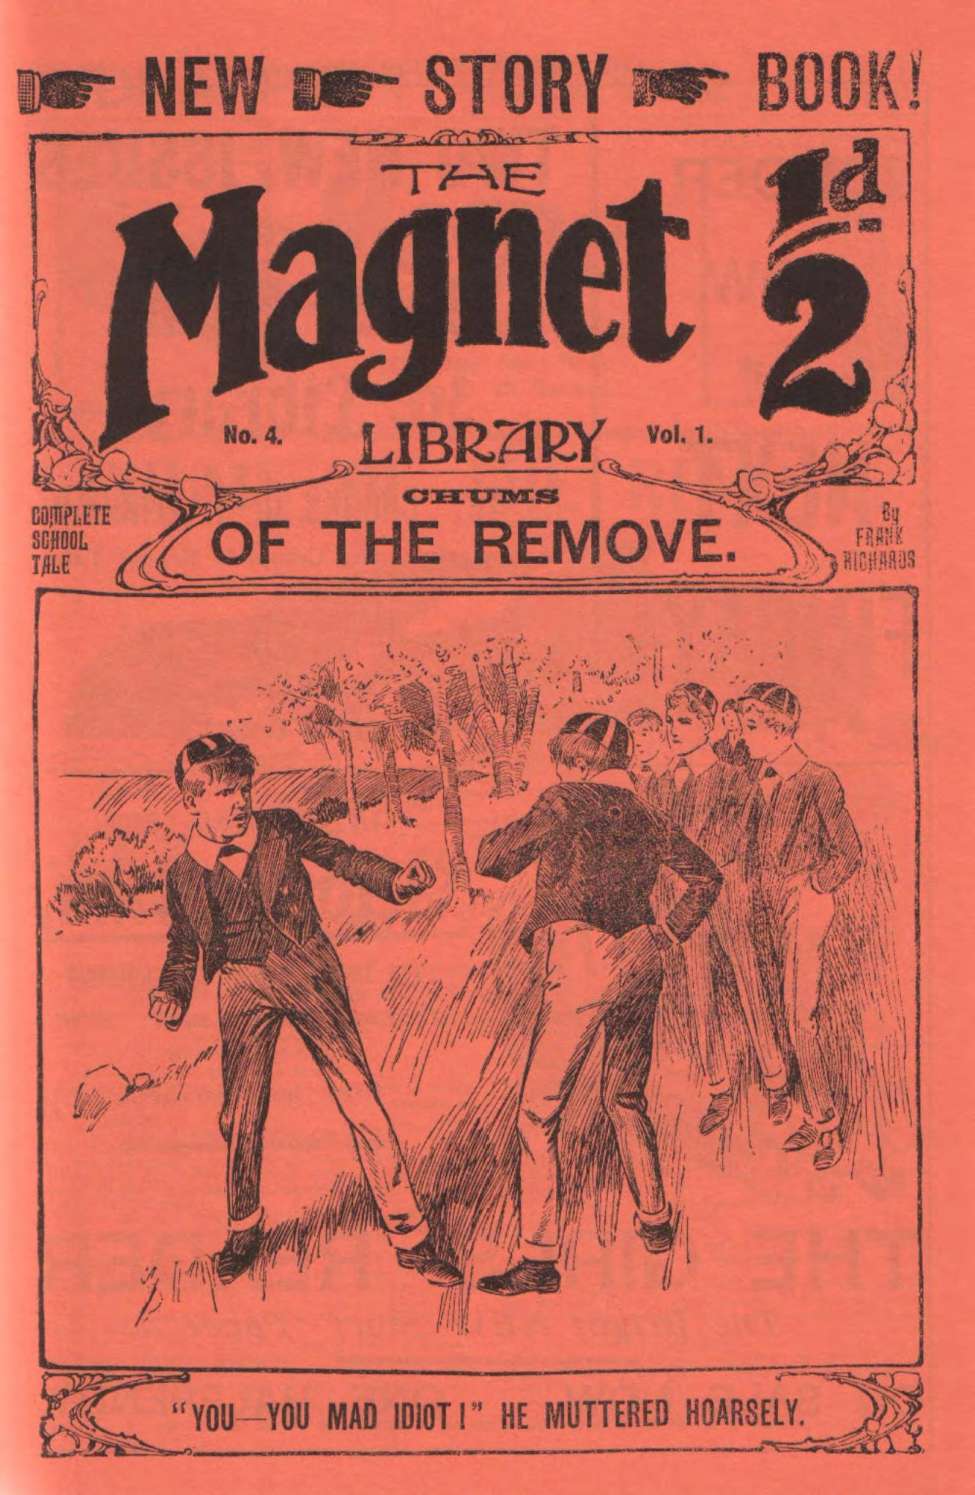 Book Cover For The Magnet 4 - Chums of the Remove